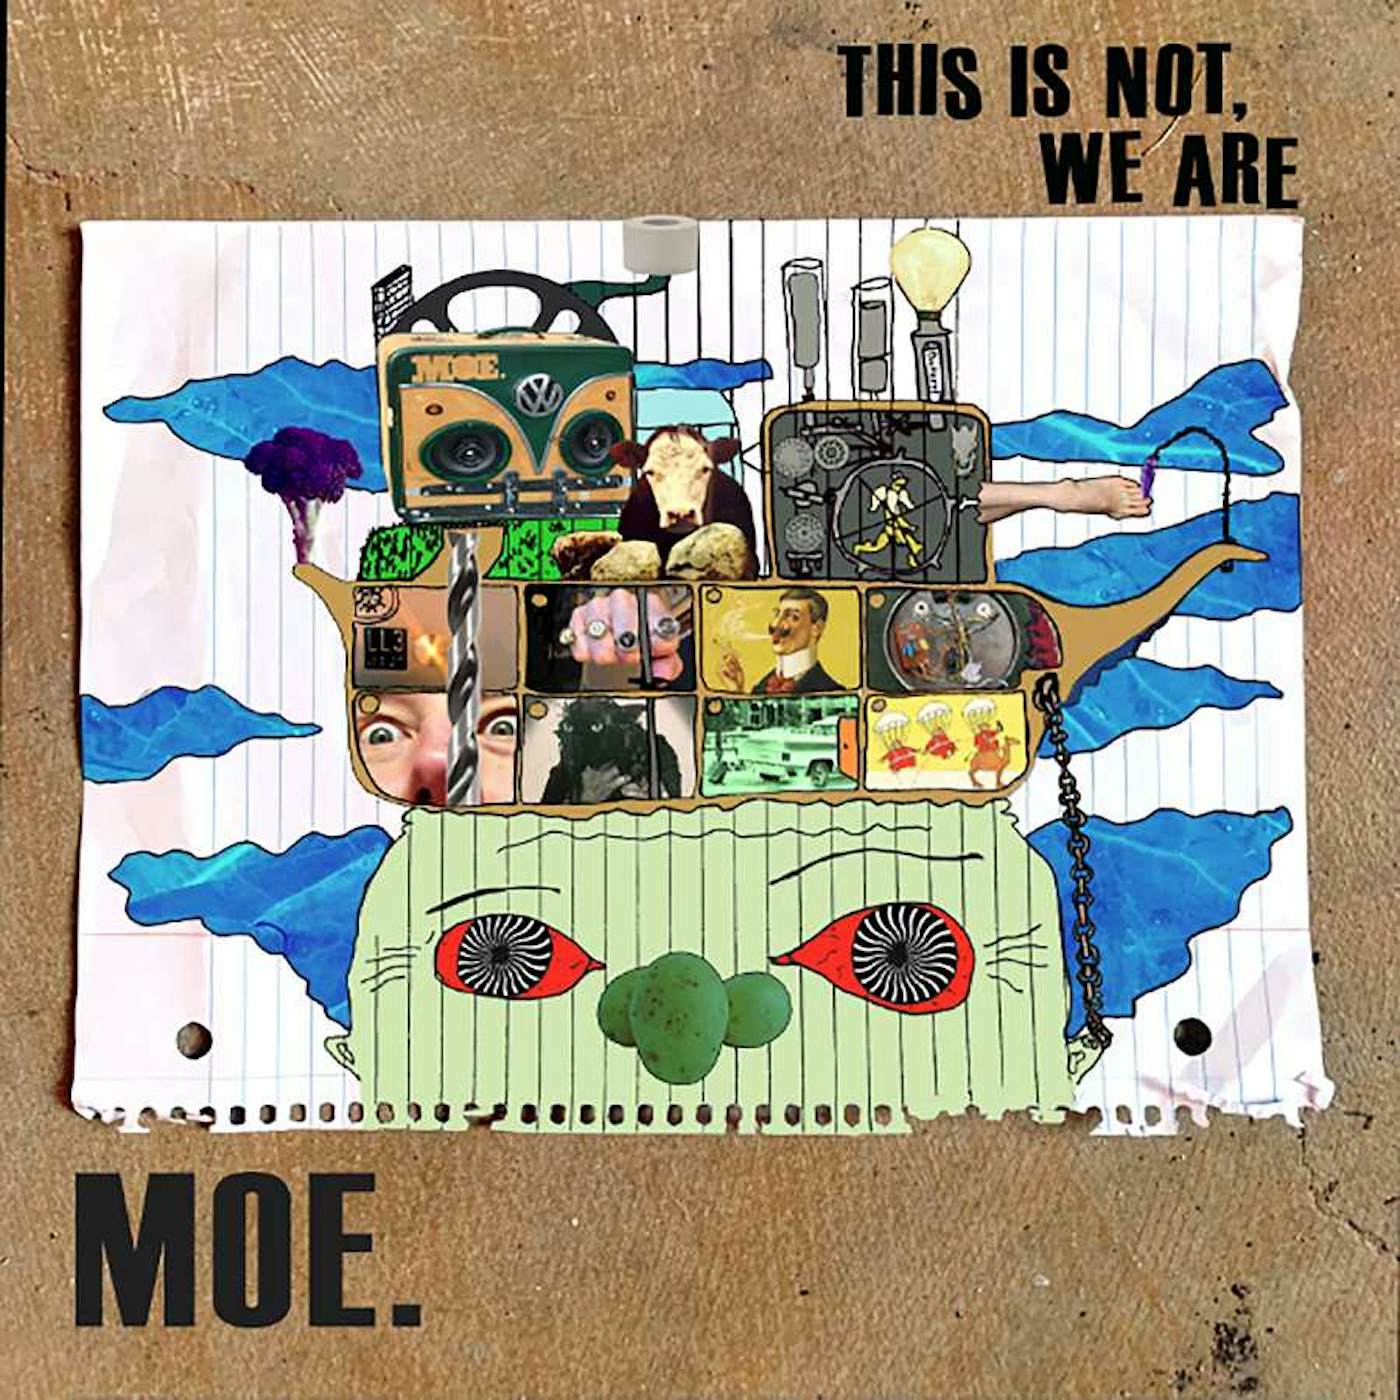 moe. THIS IS NOT, WE ARE / NOT NORMAL (2CD) CD